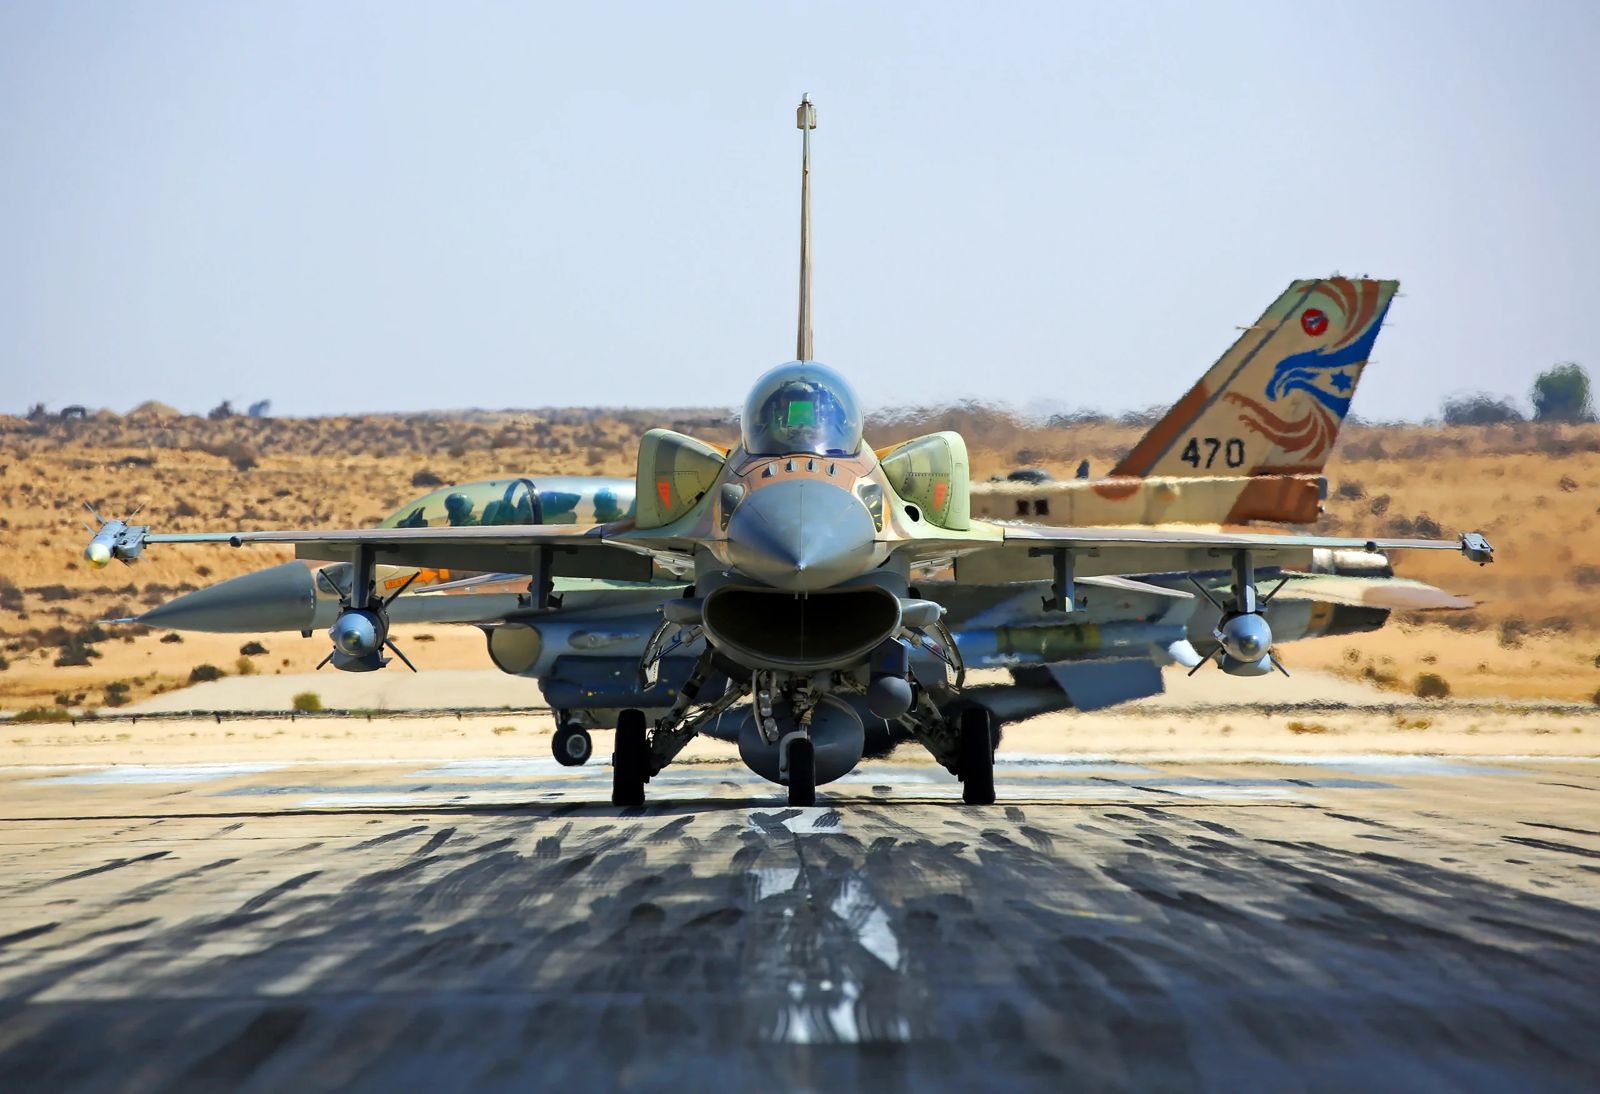 The “smart” Israeli spice in the Air Force's quiver – the “green light” from the United States